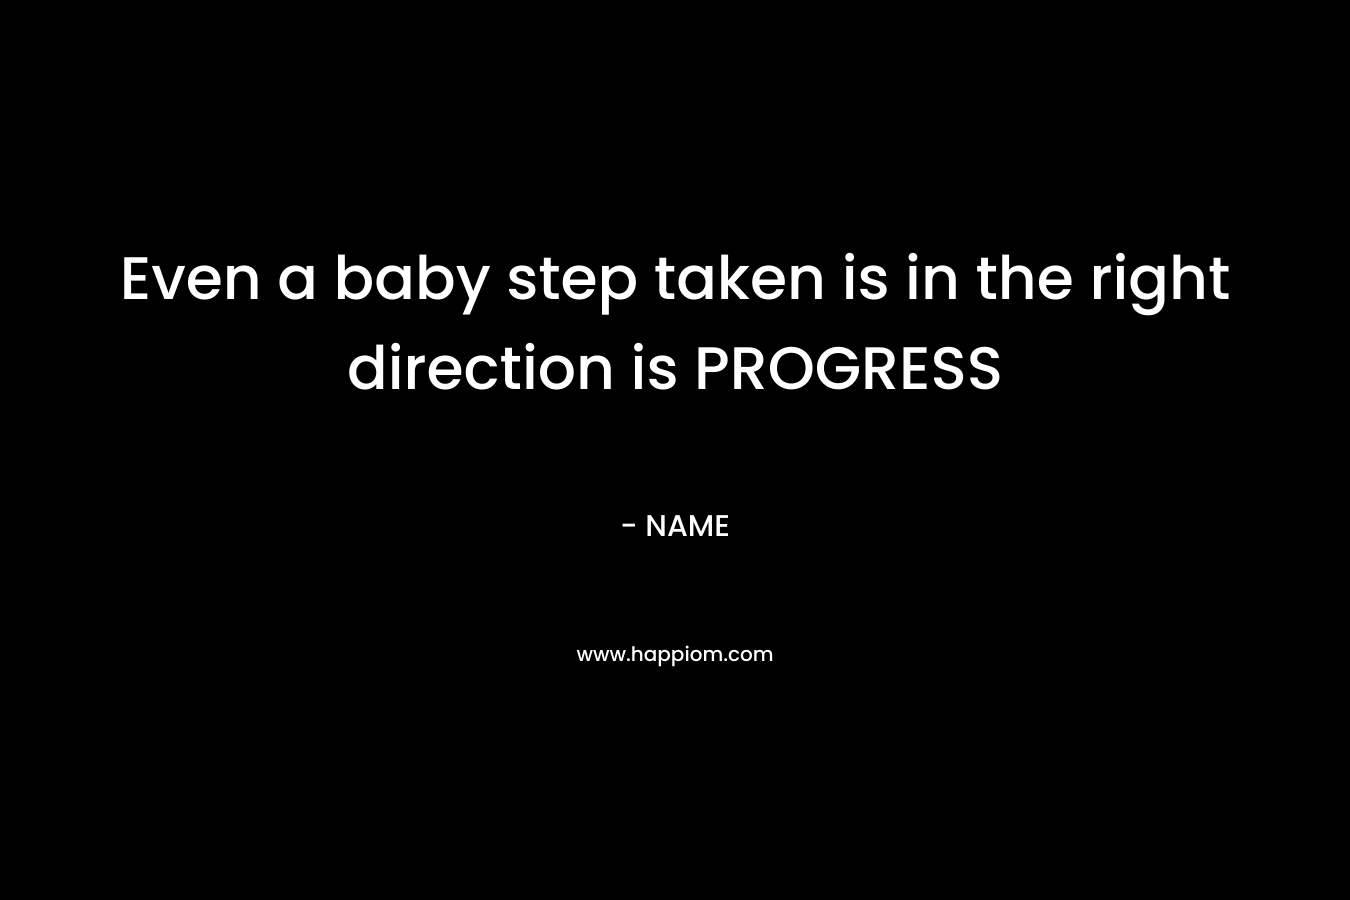 Even a baby step taken is in the right direction is PROGRESS